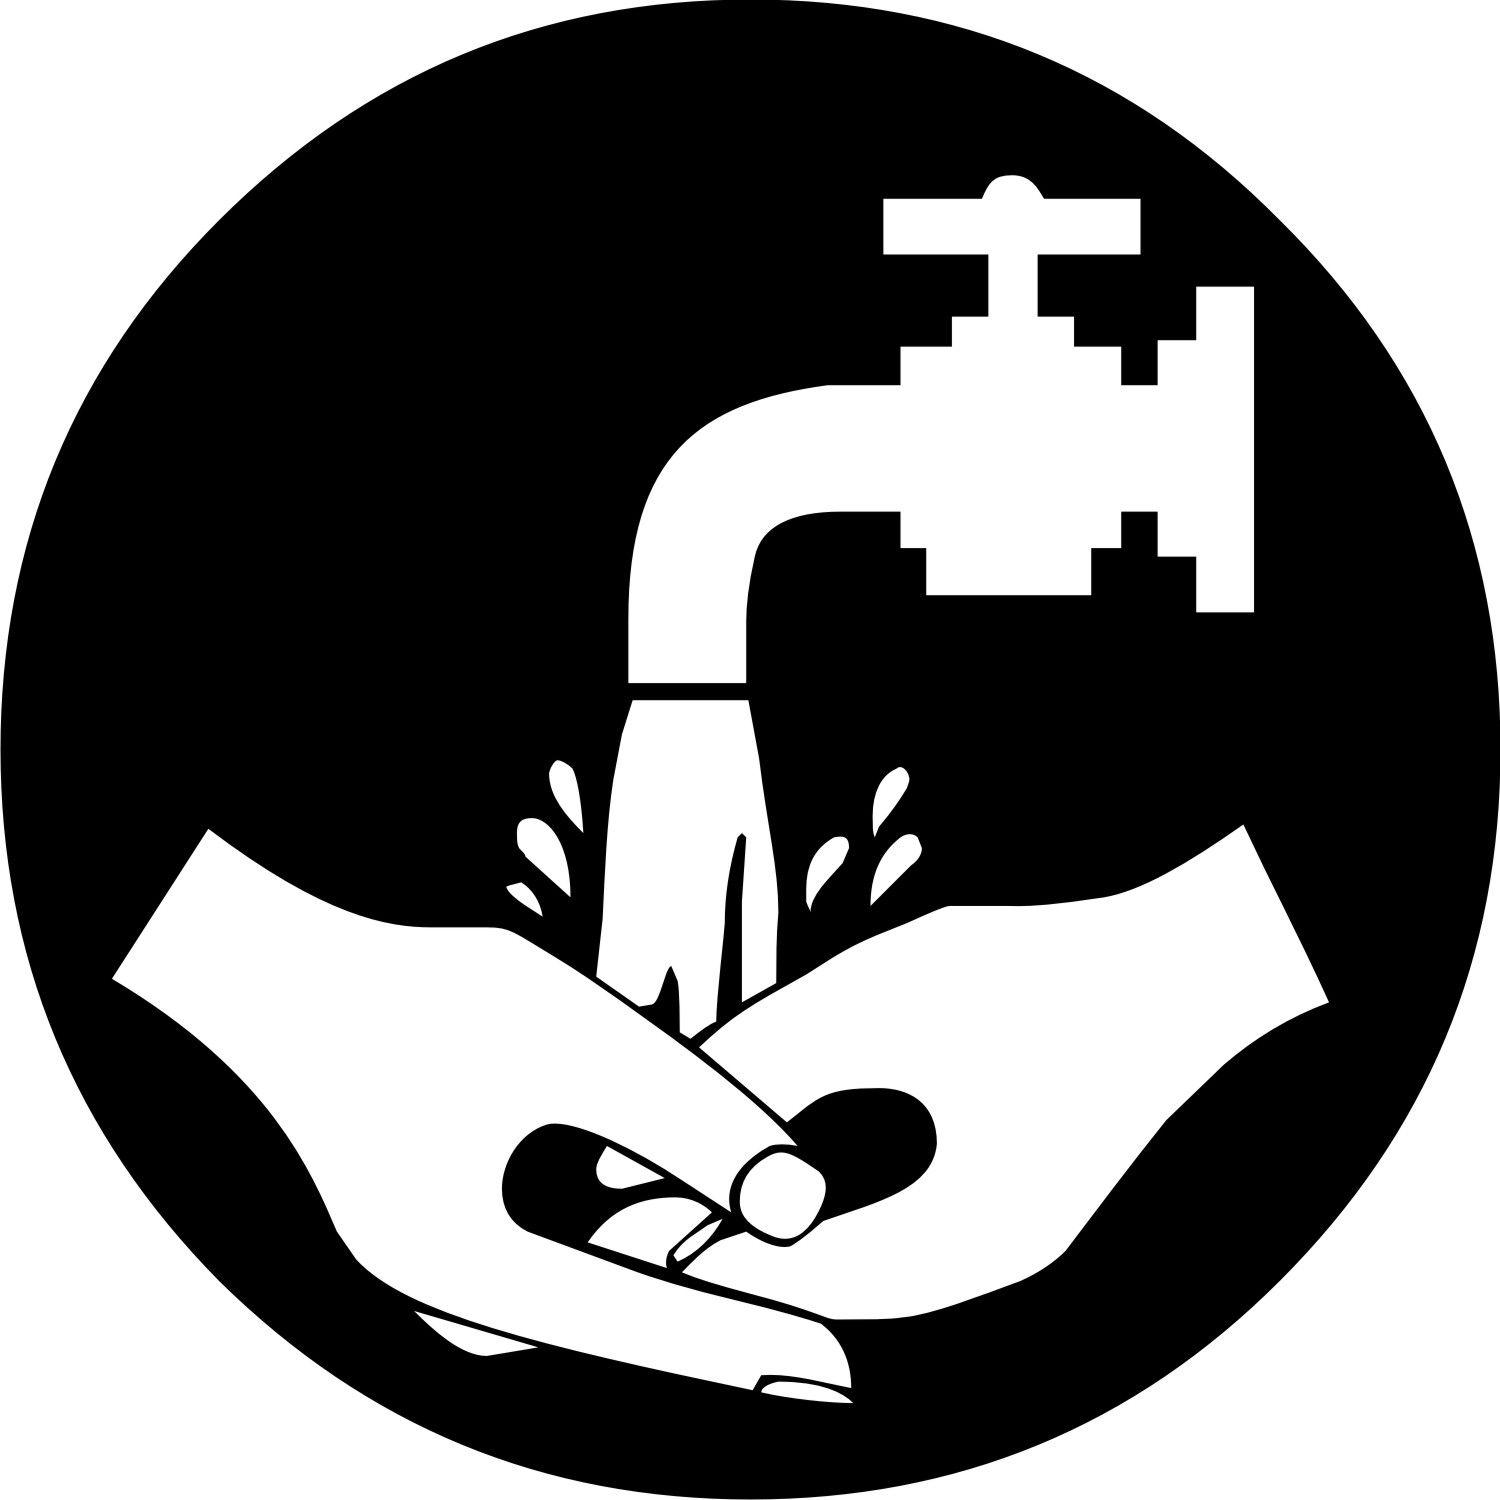 Washing Hands Clipart Group with items